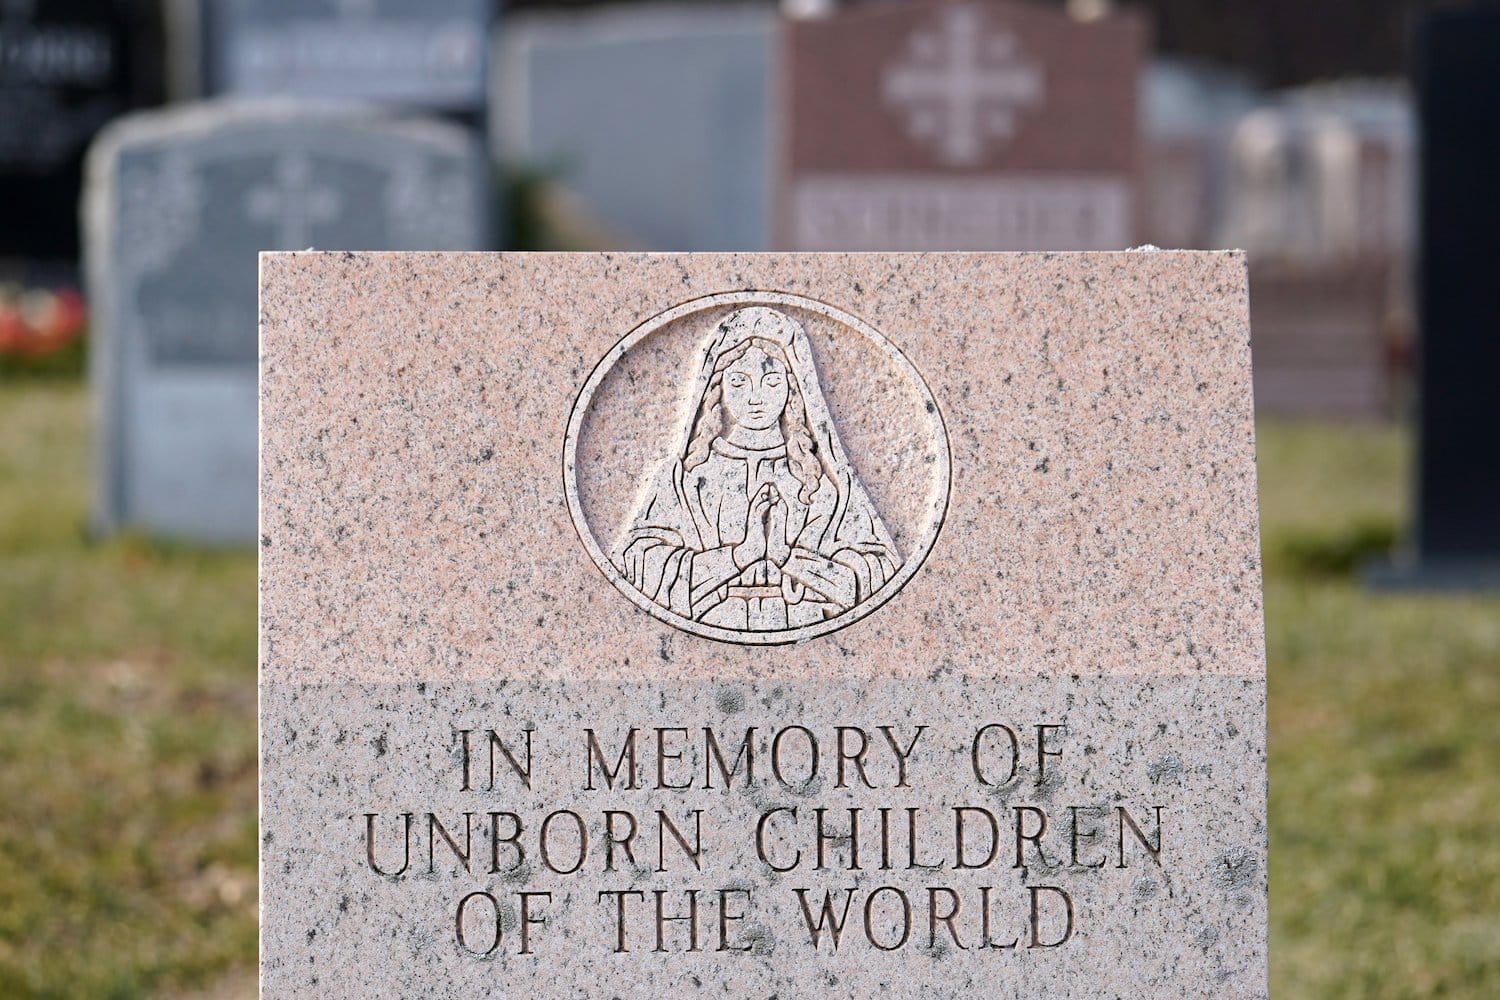 A memorial stone dedicated to the unborn children of the world is seen at St. Patrick Parish Cemetery in Smithtown N.Y.